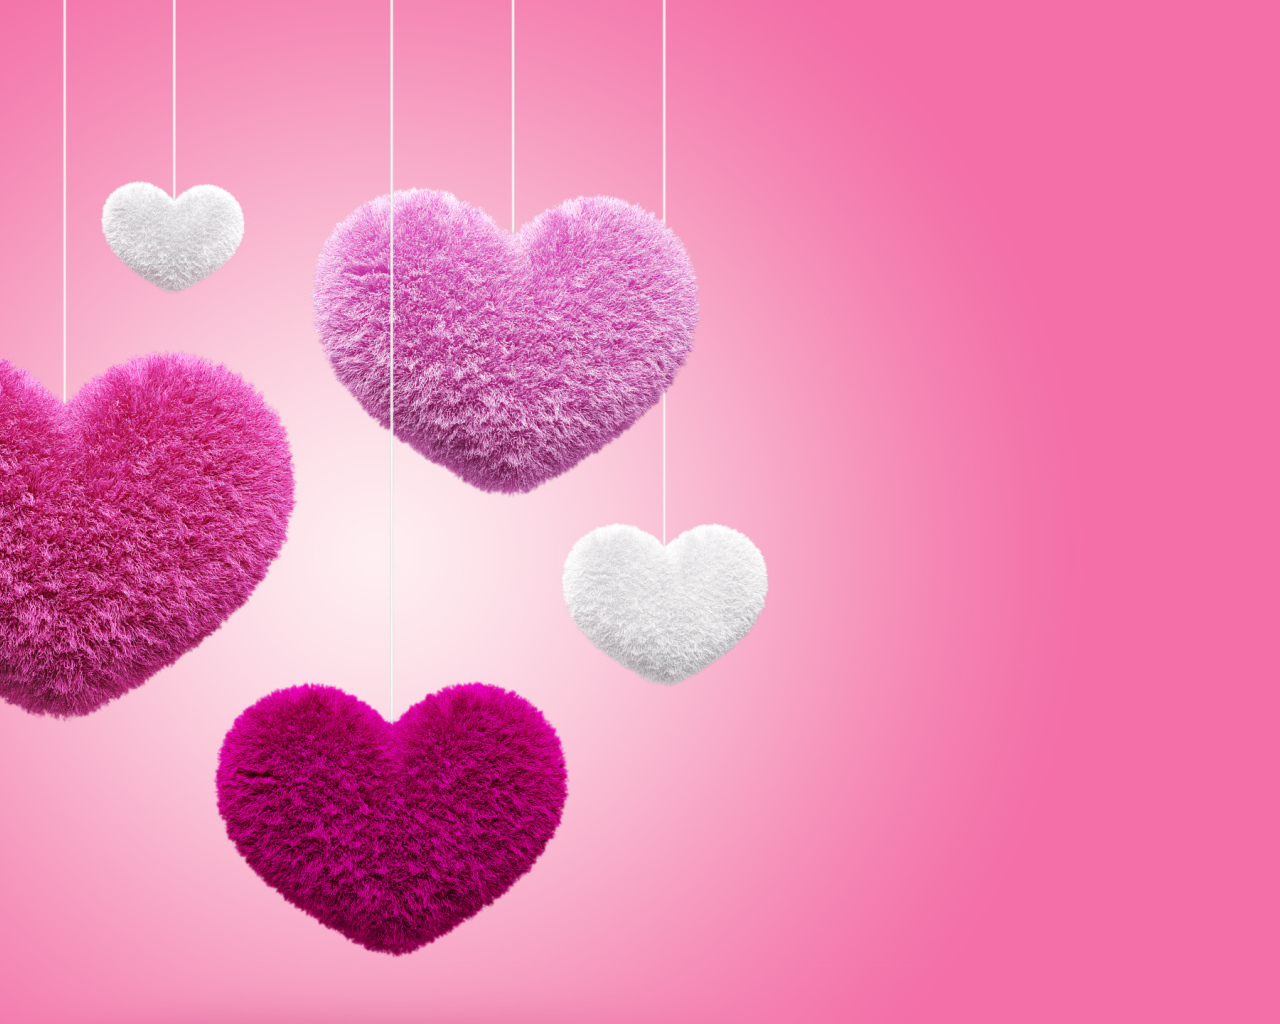 Soft fluffy hearts on a pink background